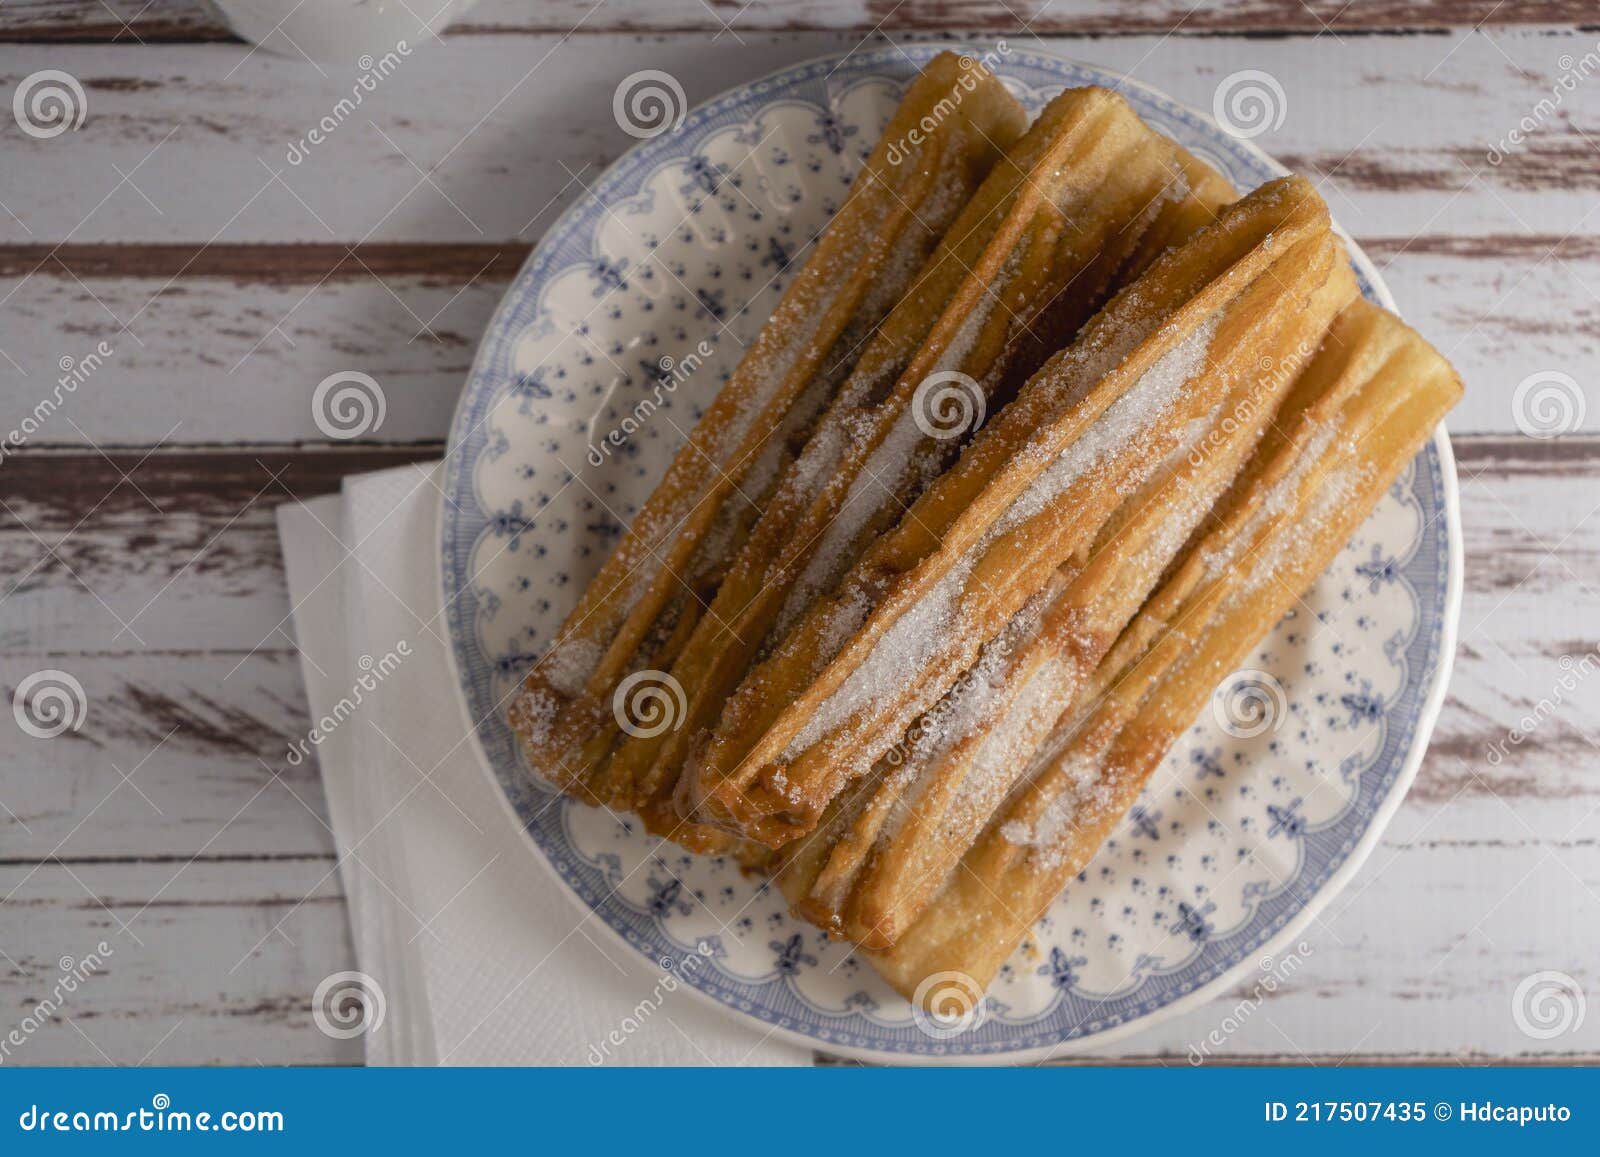 zenital view of typical hispanic churros filled with dulce de leche in a vintage plate on old boards. copy space